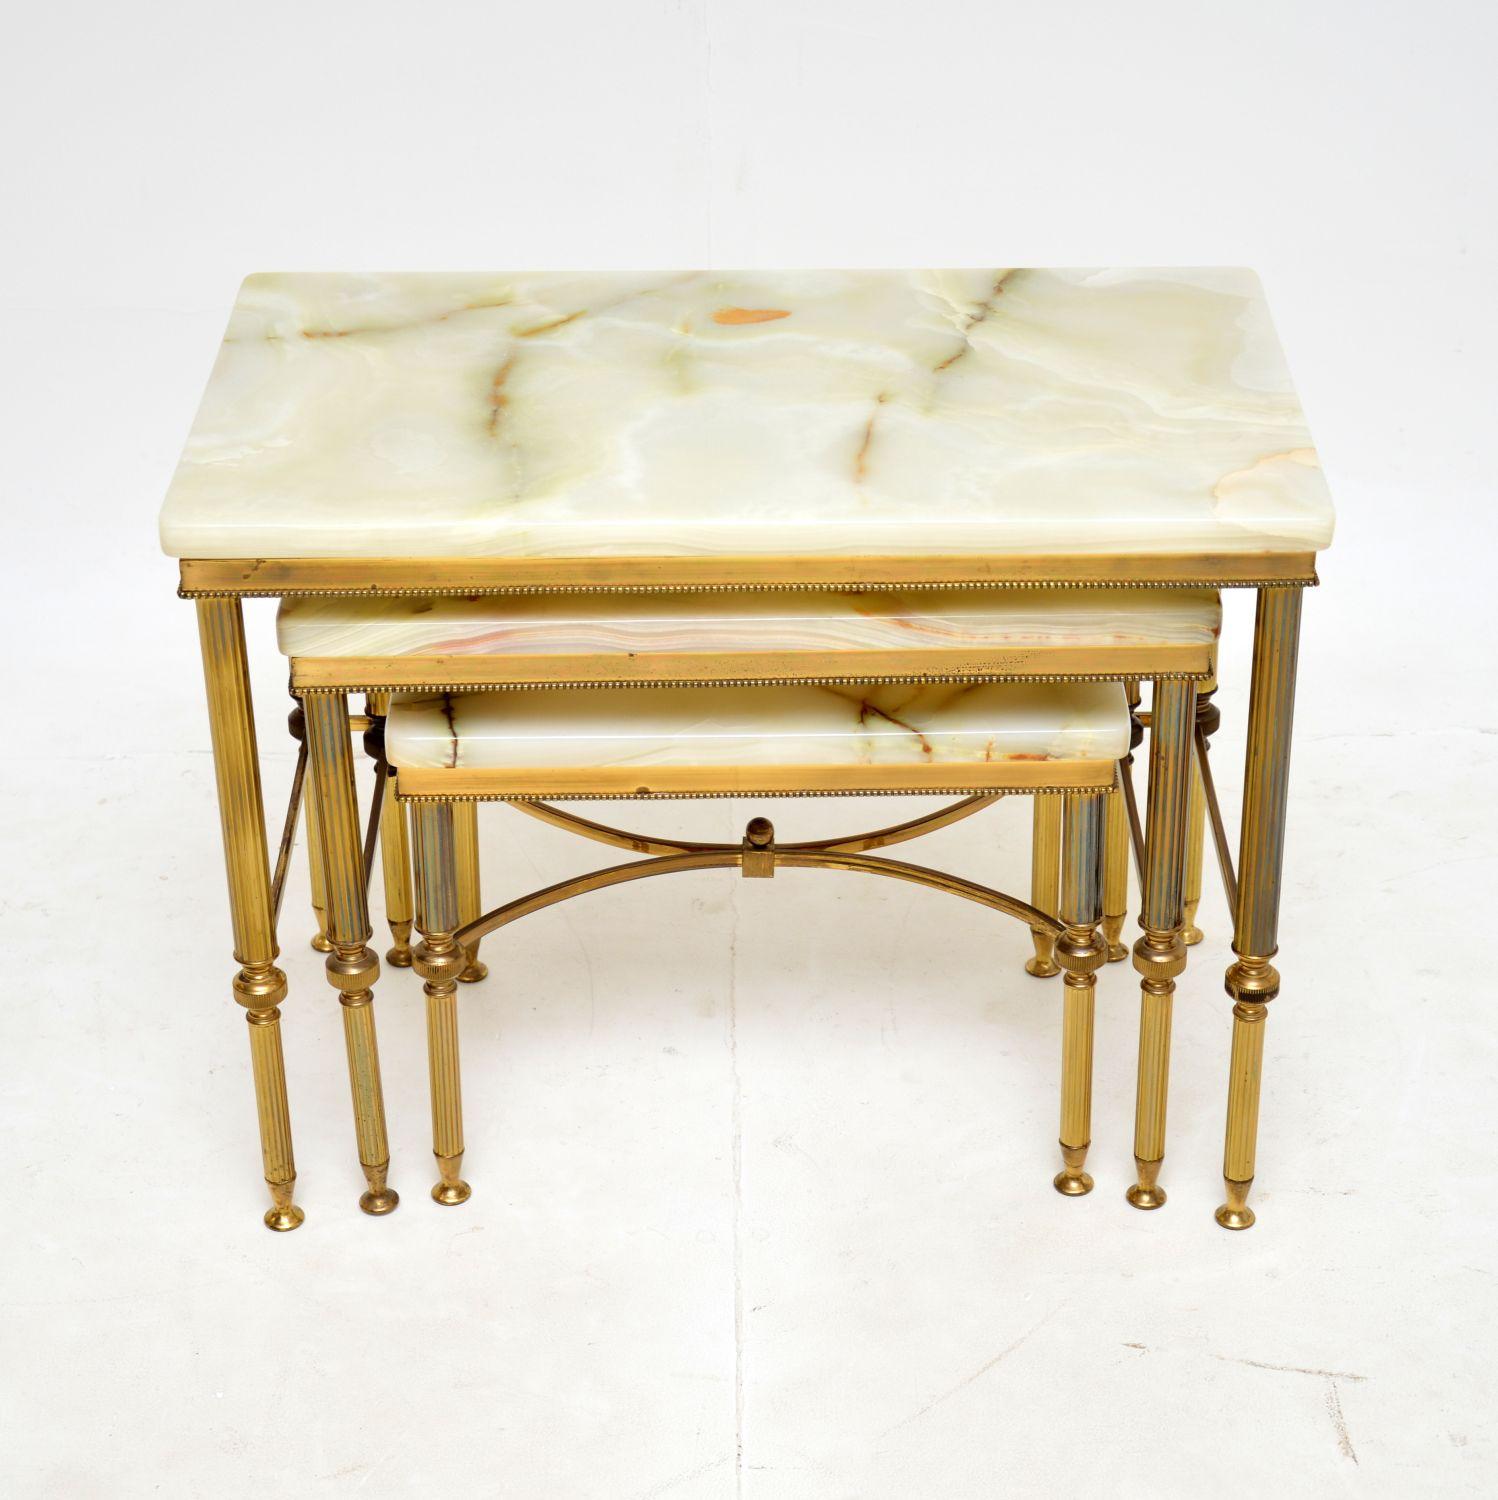 Neoclassical Antique French Brass & Onyx Nest of Tables